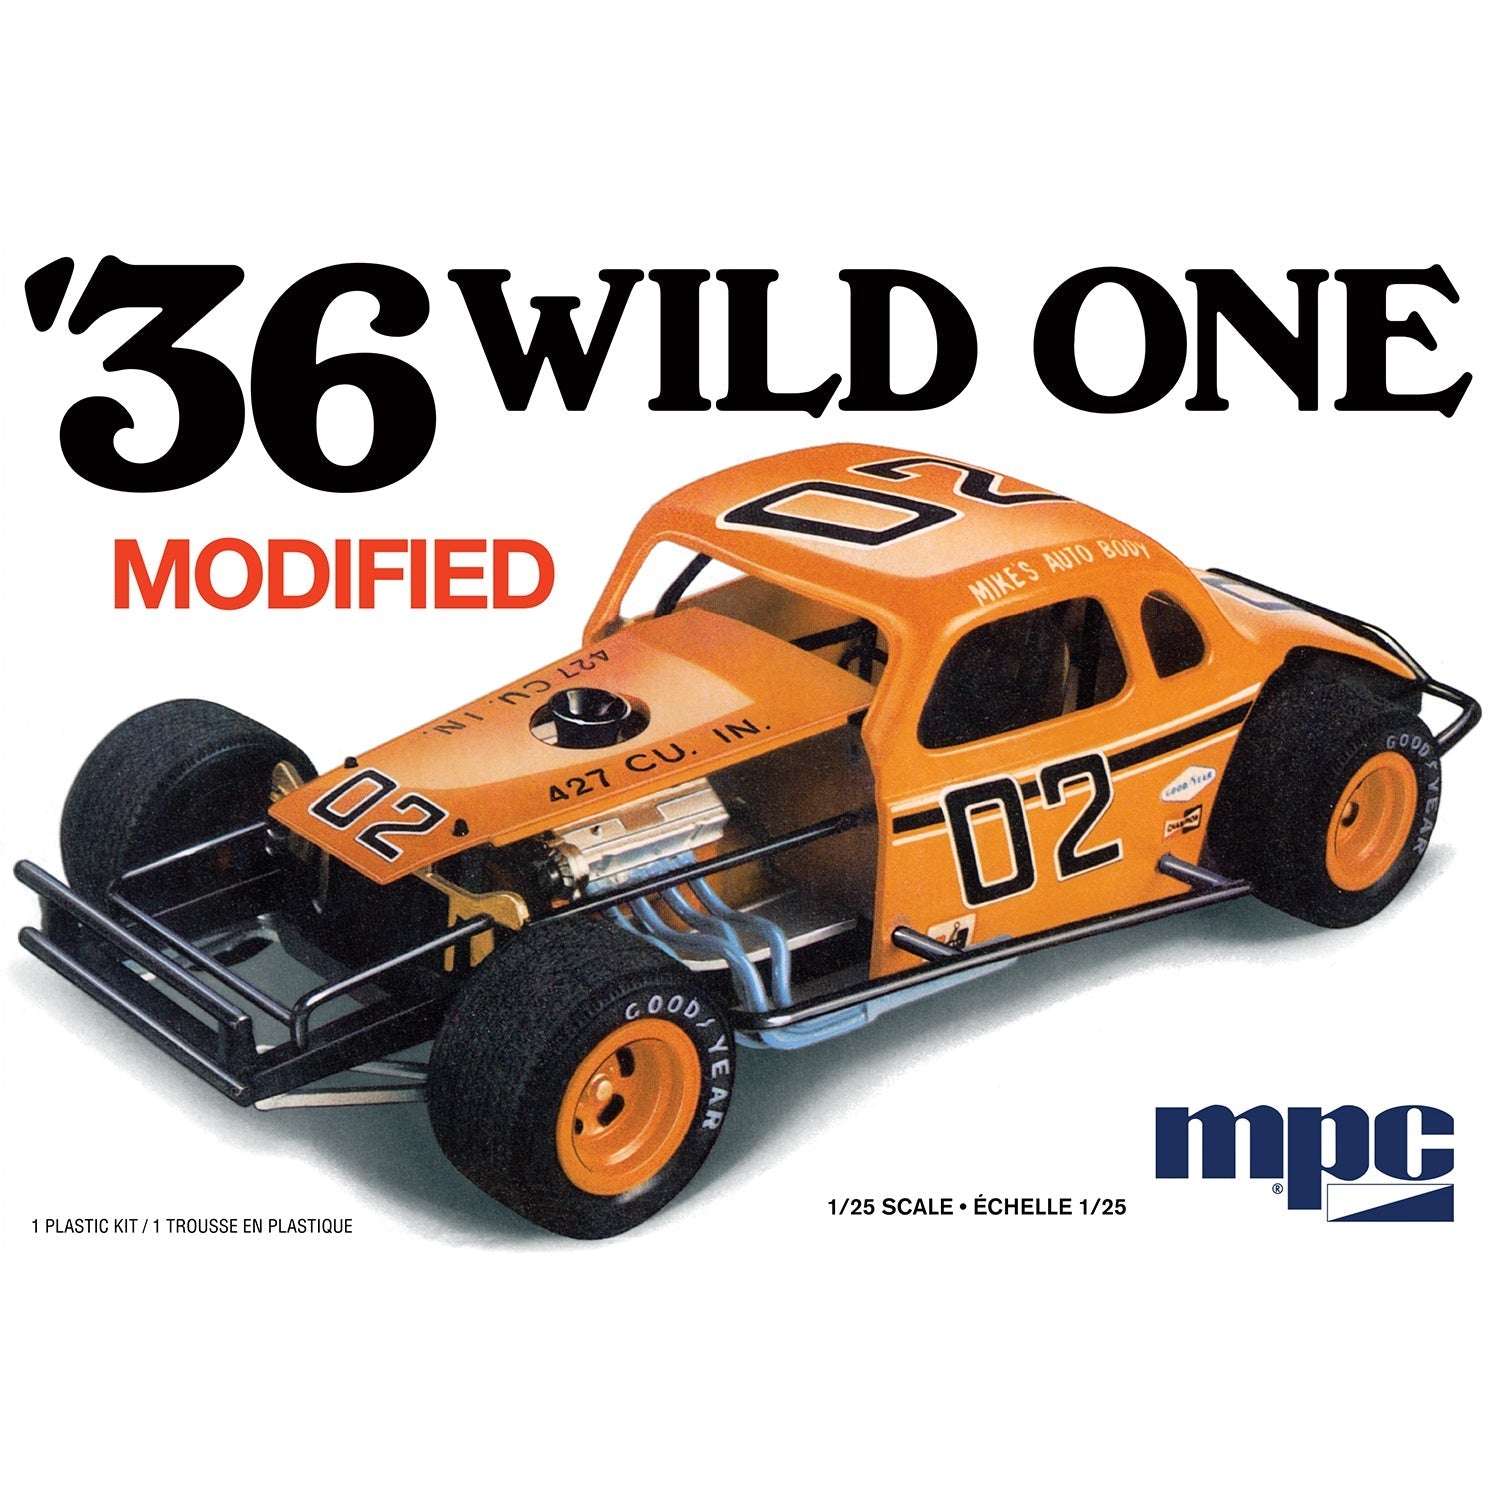 M Pieces® '36 Wild One Modified Plastic Model Kit, 1/25 Scale - Micro - Mark Scale Model Kits